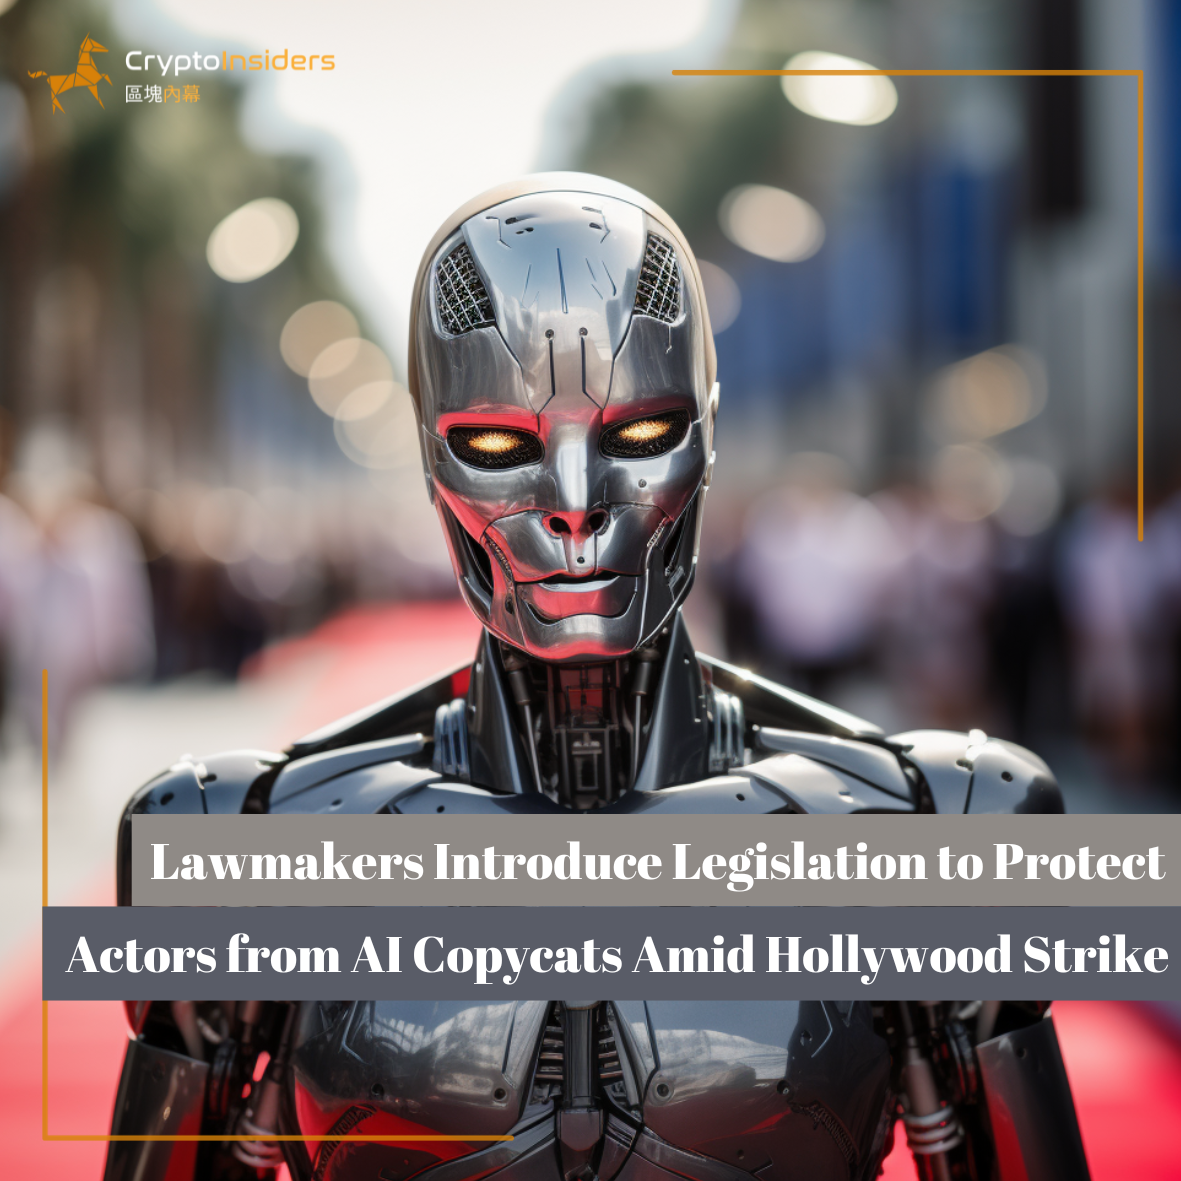 Lawmakers-Introduce-Legislation-to-Protect-Actors-from-AI-Copycats-Amid-Hollywood-Strike-Crypto-Insiders-Hong-Kong-Blockchain-News